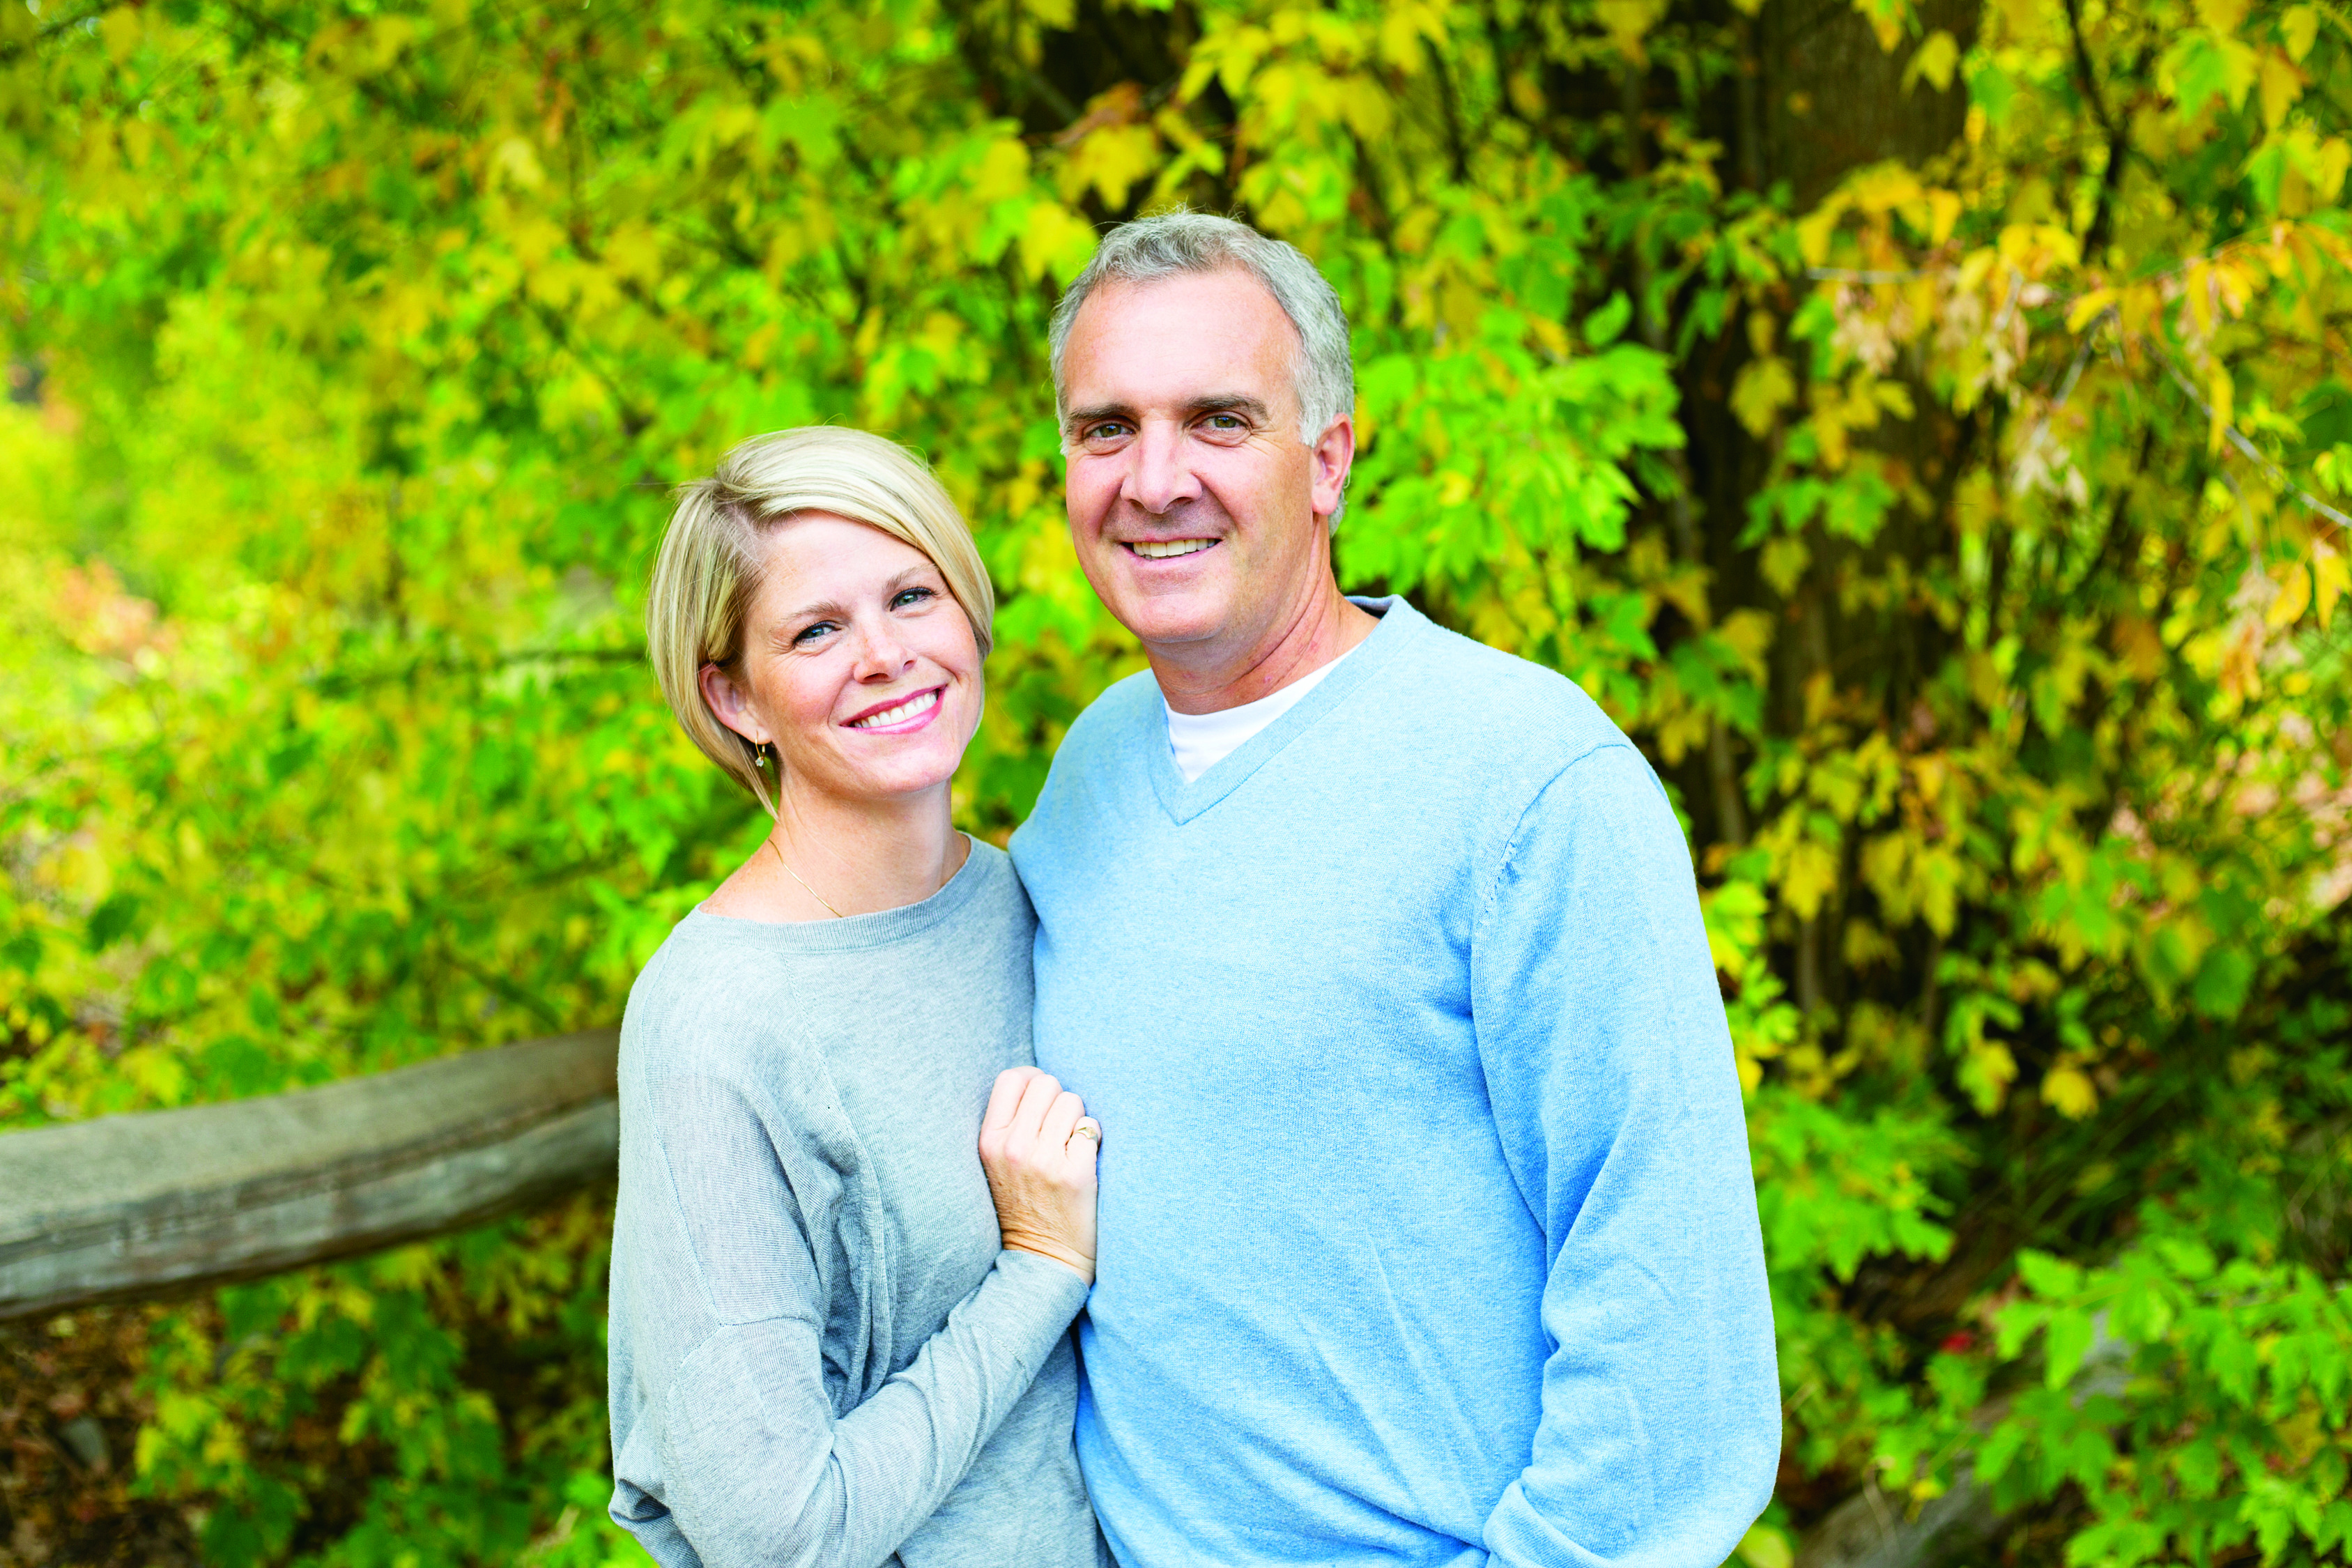 A smiling couple is standing in front of bright green bushes.